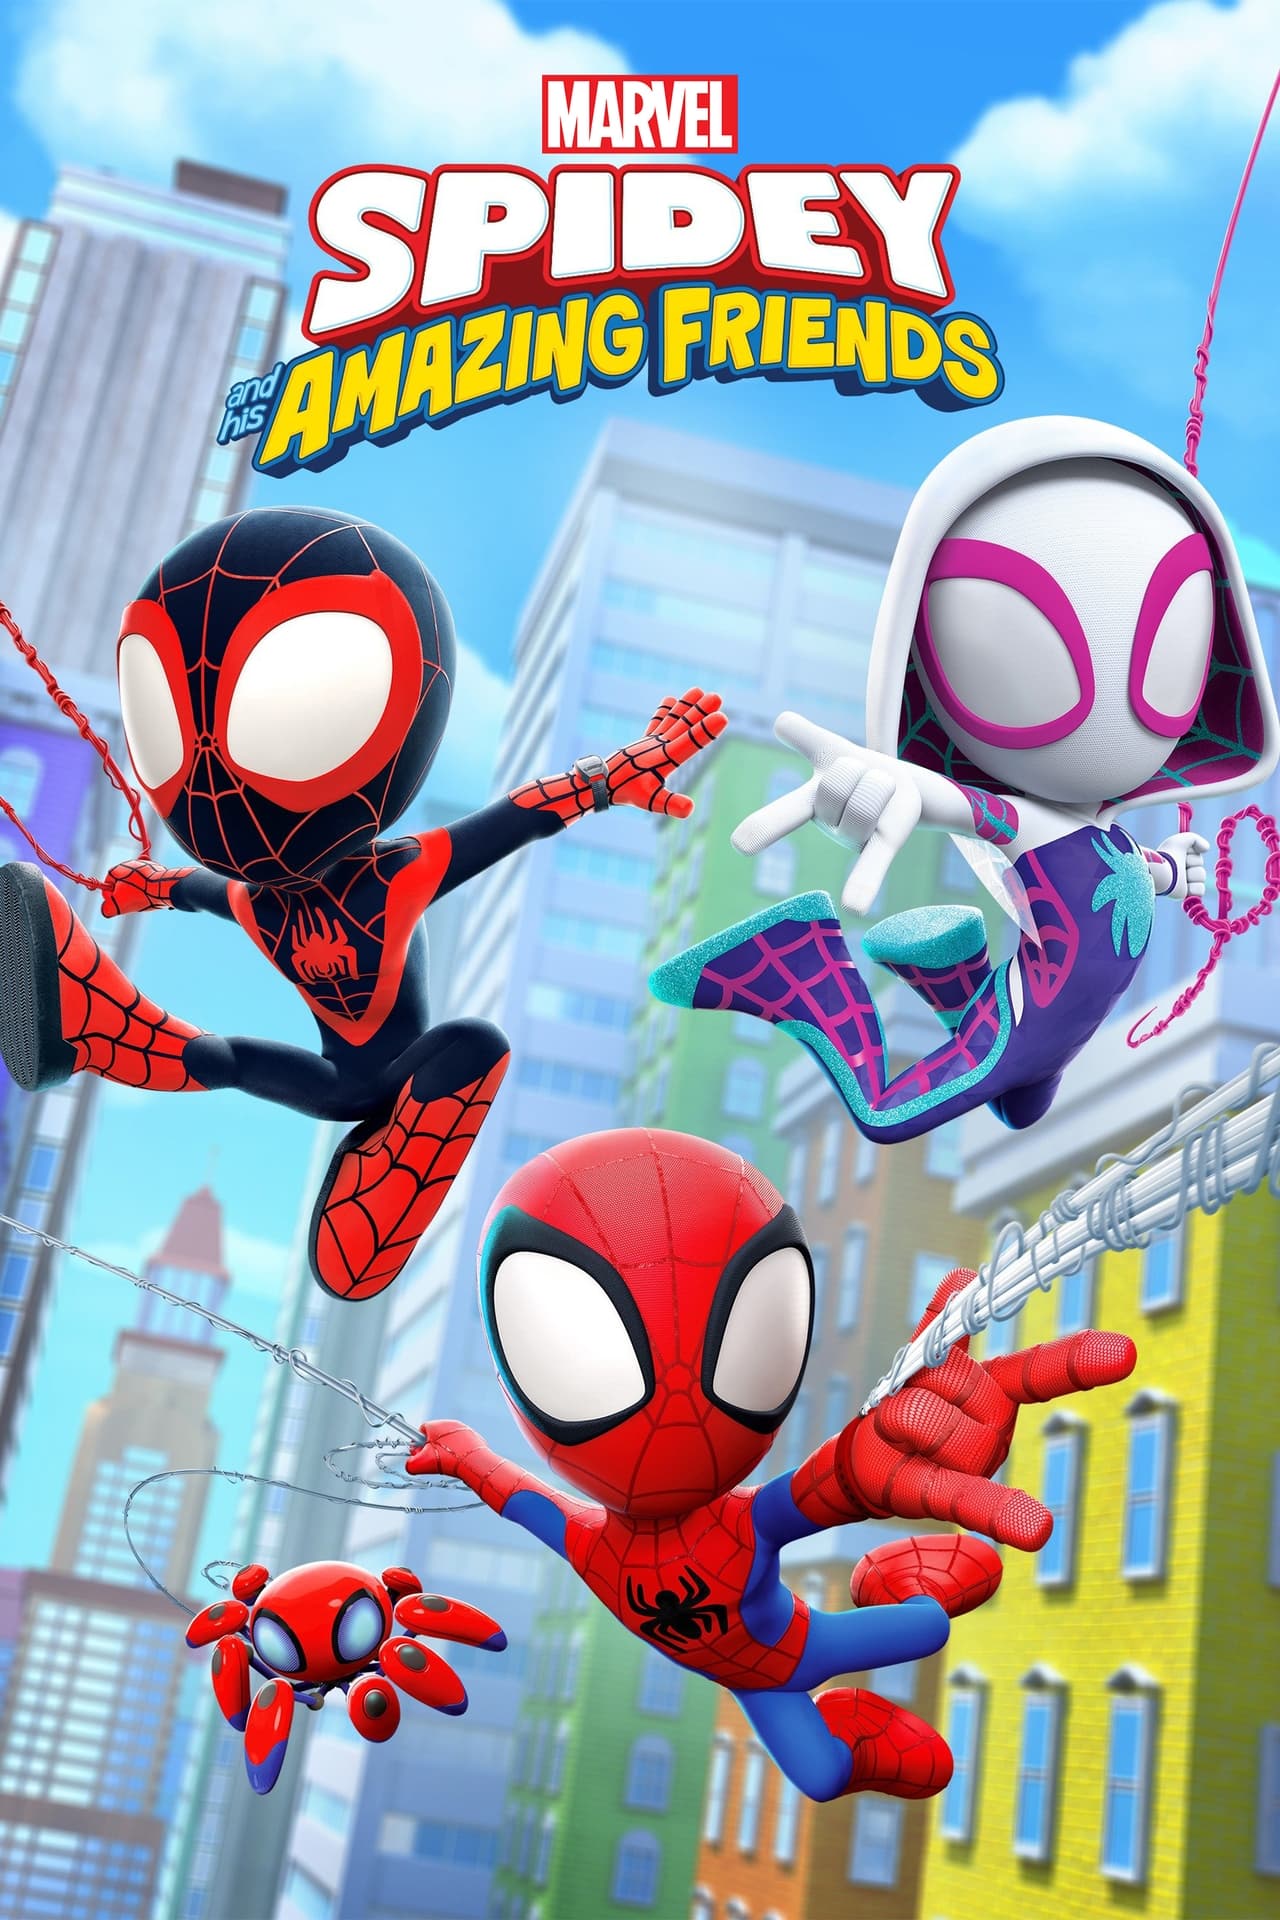 Marvel's Spidey and His Amazing Friends (season 1)